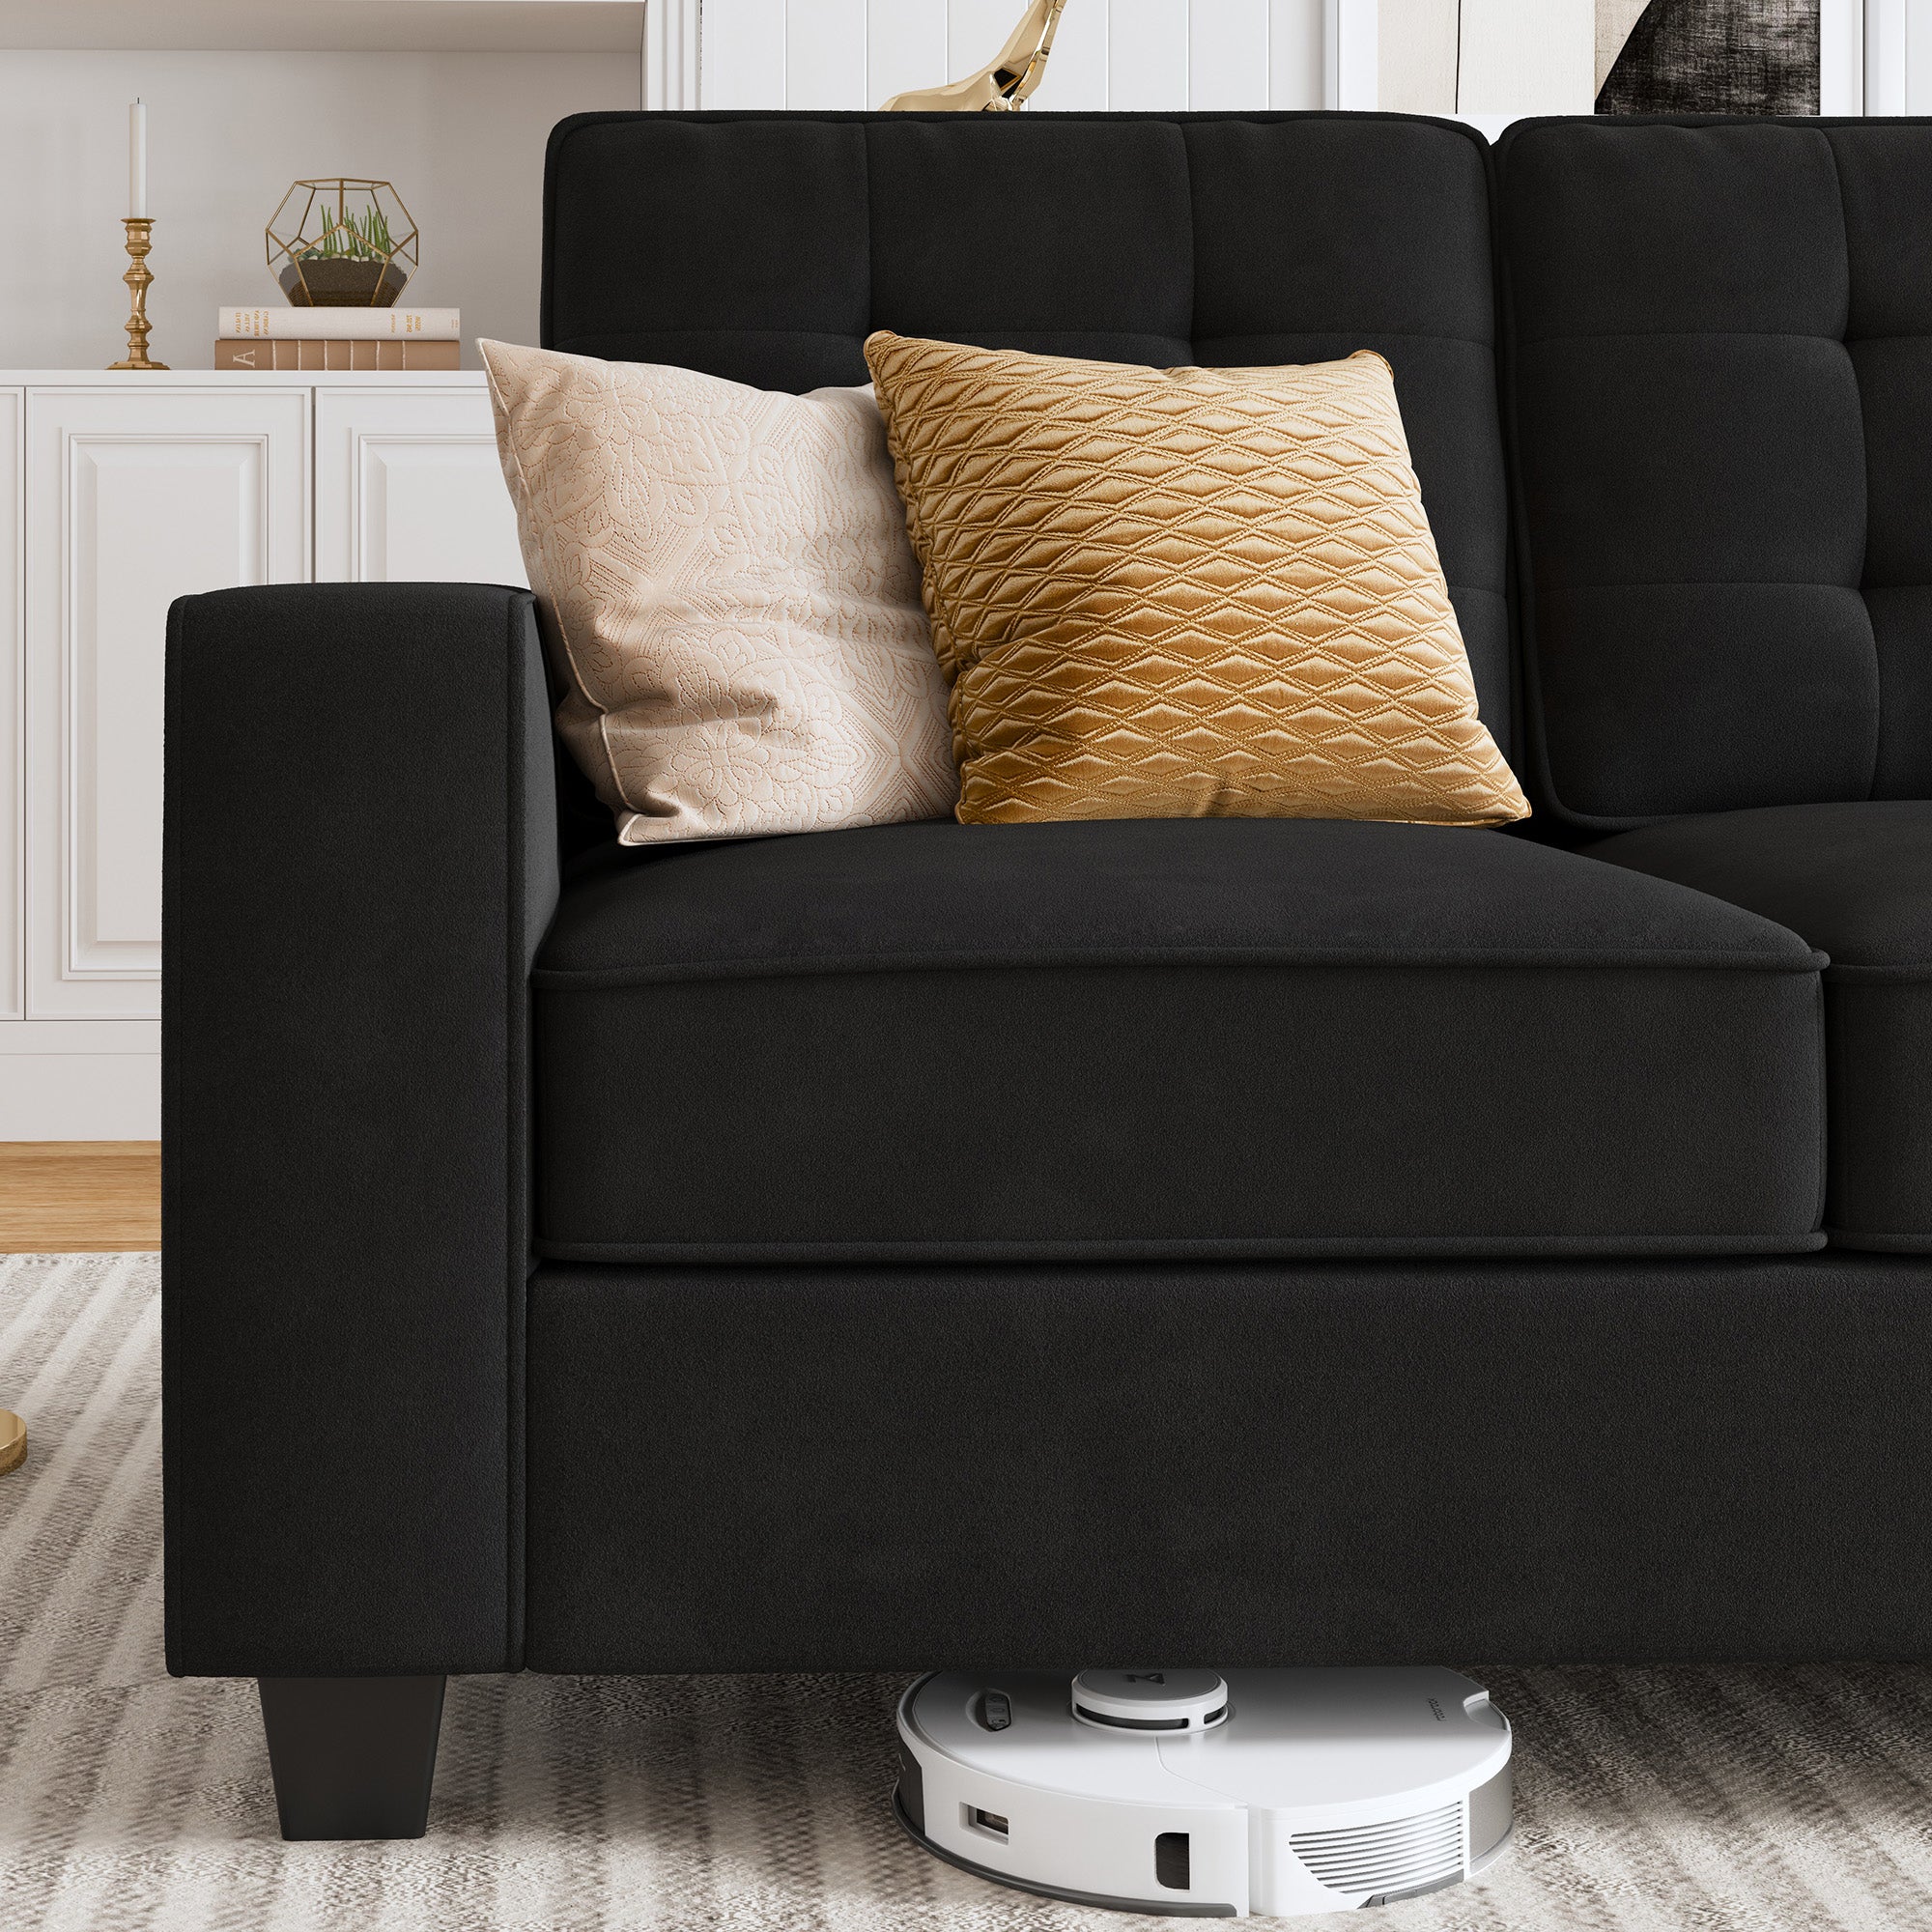 HONBAY Velvet 4-Seat Sectional Sofa Couch with Optional Extra Stoage Chaise&Ottoman